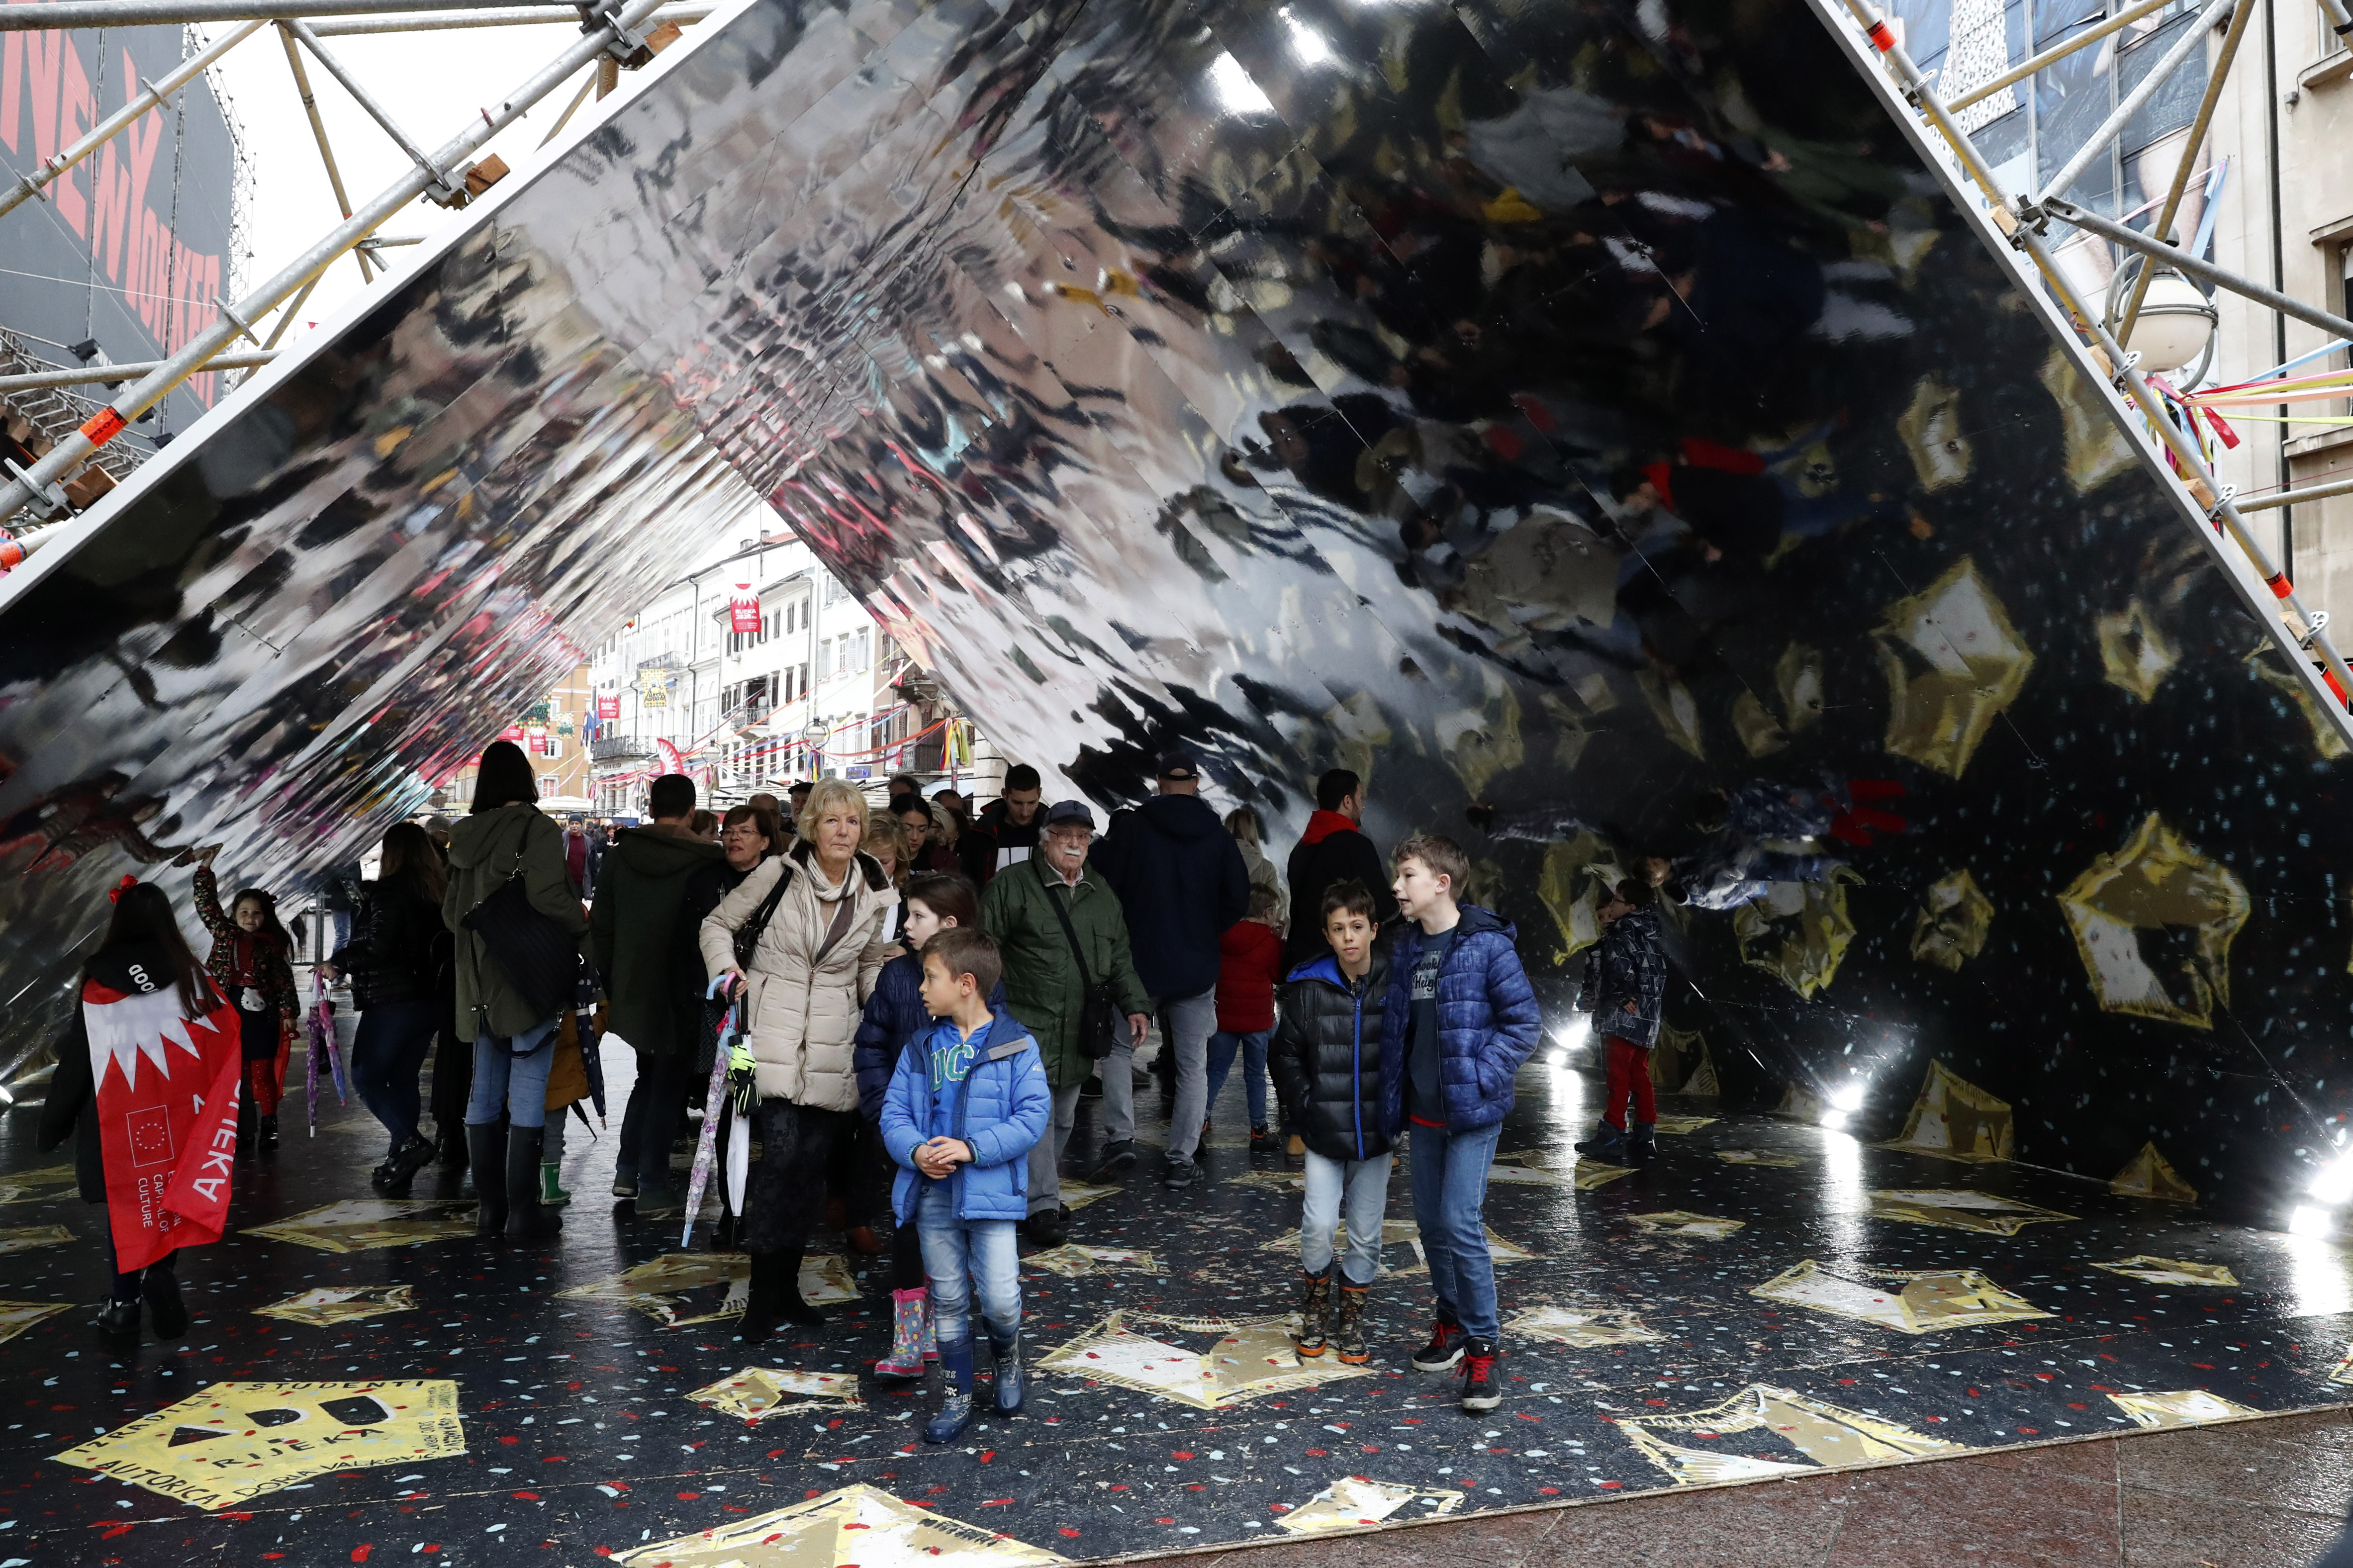 Visitors walk through a giant kaleidoscope in downtown Rijeka, Croatia, Saturday, Feb. 1, 2020. Adriatic port city of Rijeka is European Capital of Culture designated by the European Union for the year 2020, during which a series of cultural events with a strong pan-European dimension will be organized. (AP Photo/Darko Bandic)